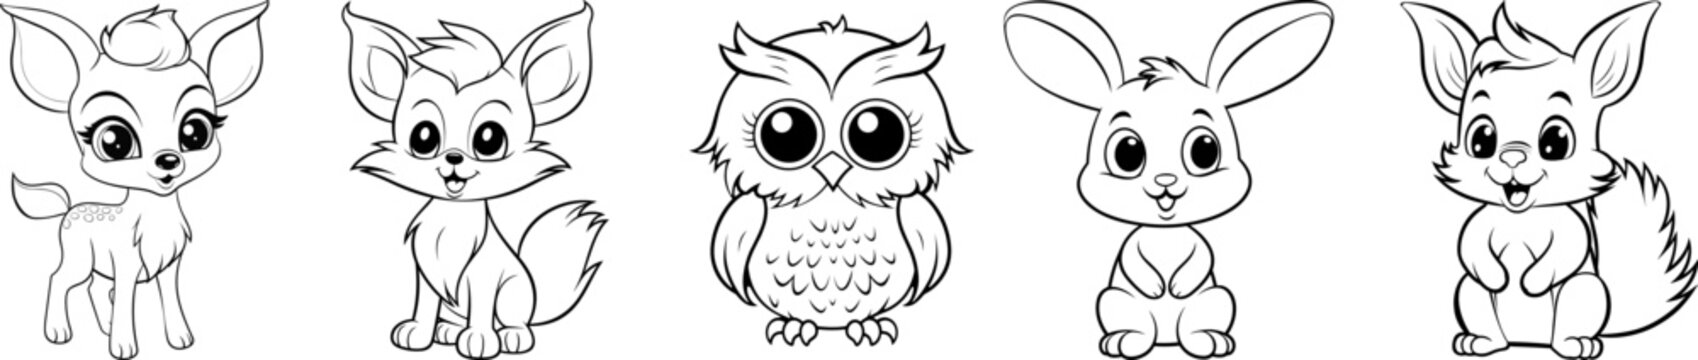 Forest animals friendly cartoon characters collection. Deer, fox, owl, rabbit and squirrel friends. Black outline coloring book vector illustrations.